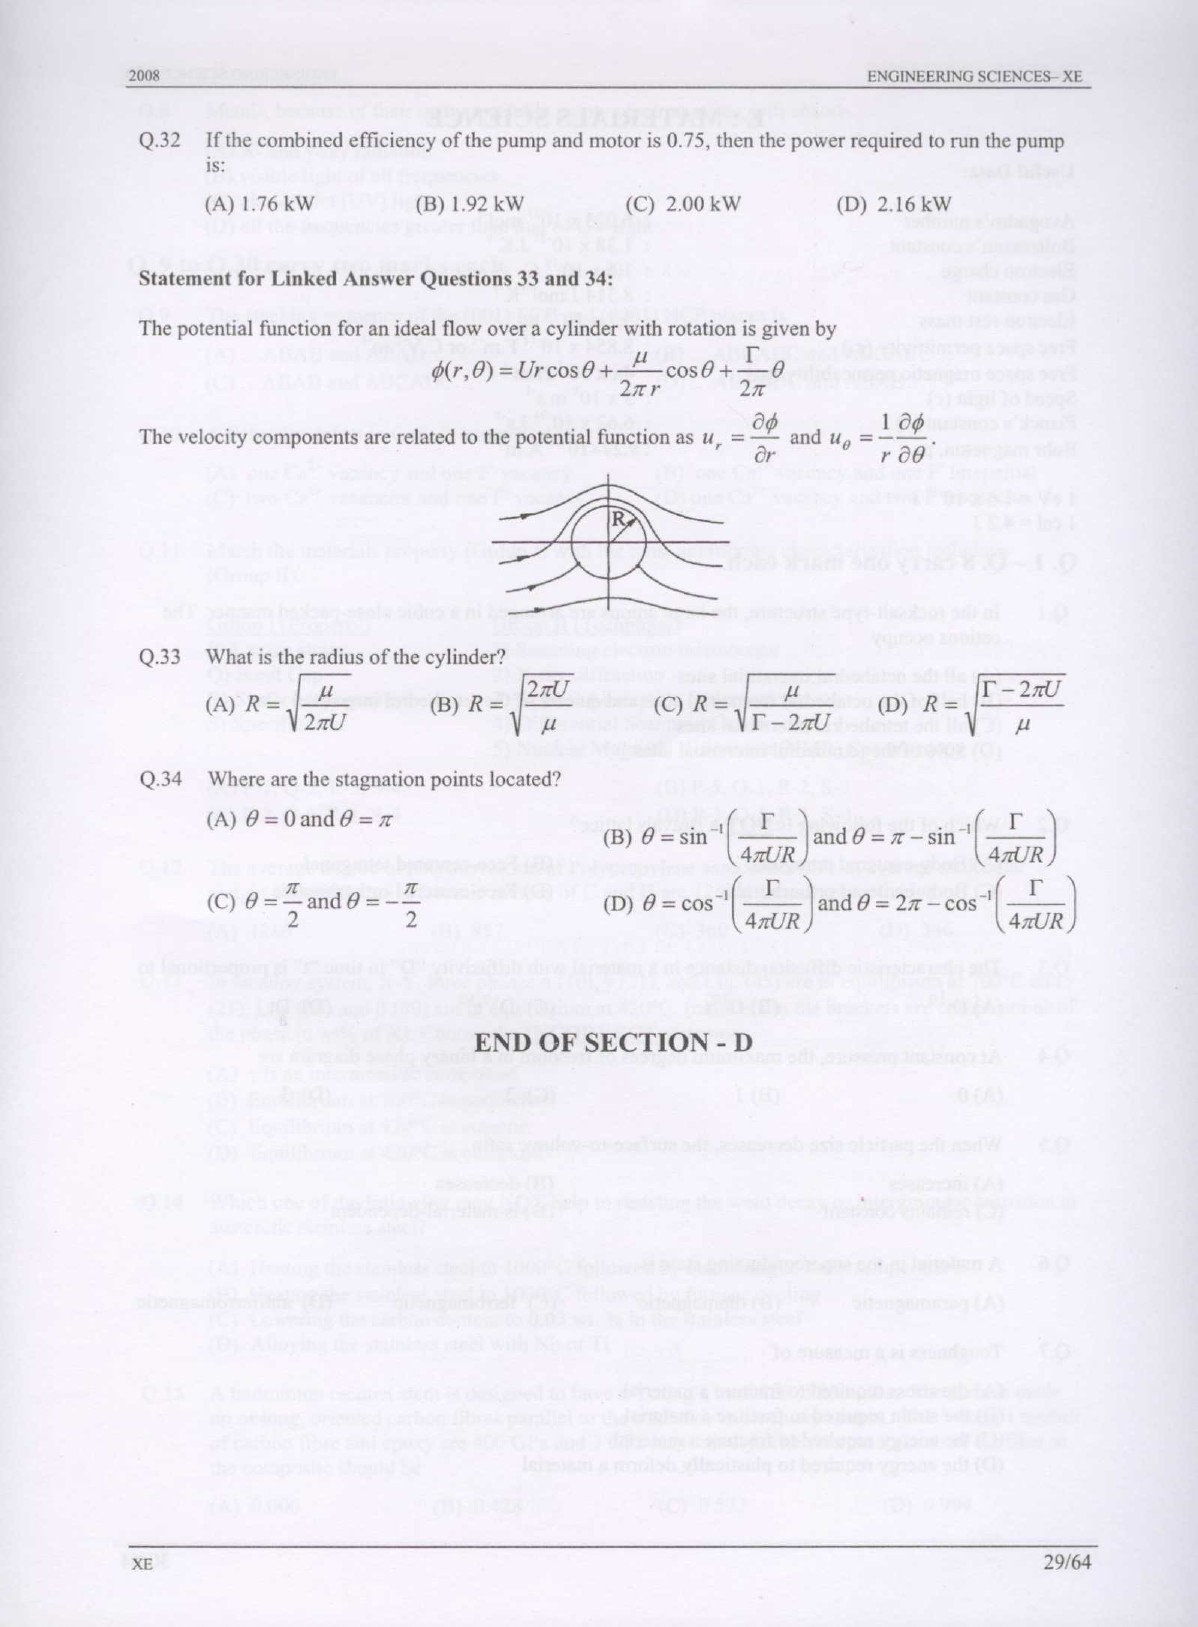 GATE Exam Question Paper 2008 Engineering Sciences 29